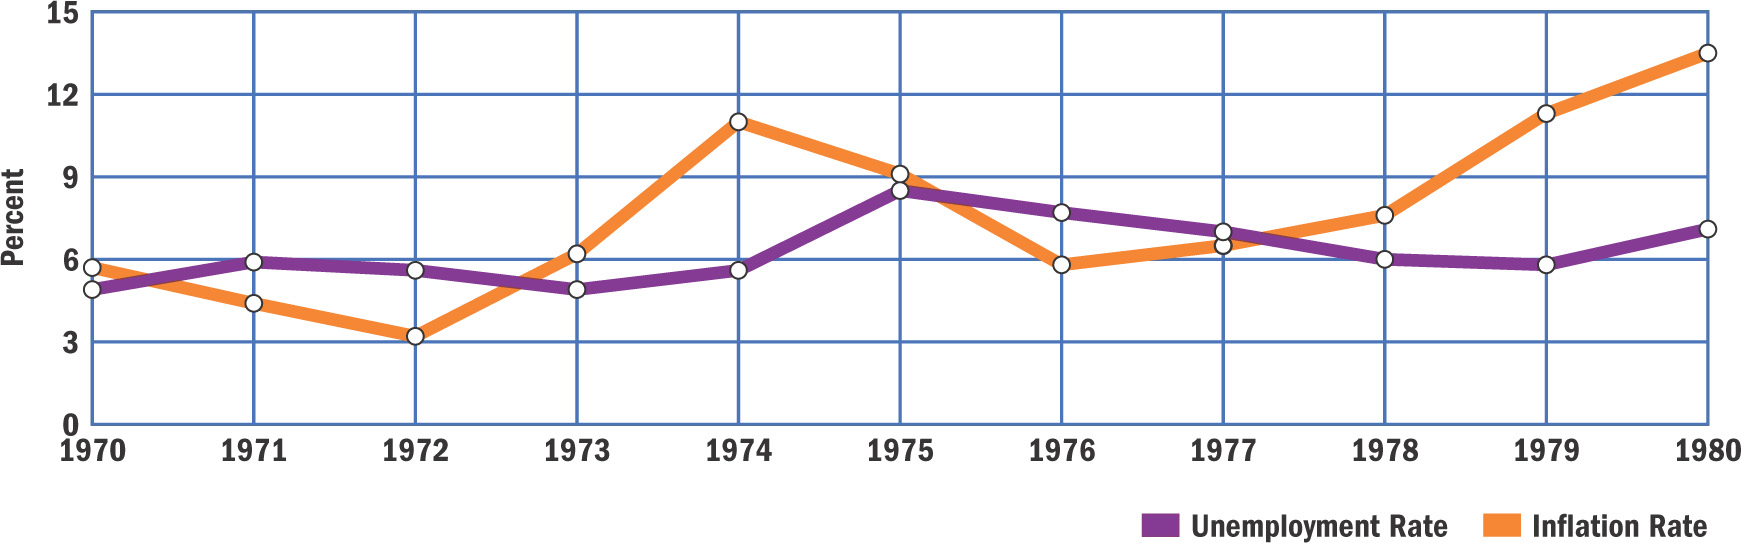 a graph shows the unemployment rate and the inflation rate from 1970 to 1980.